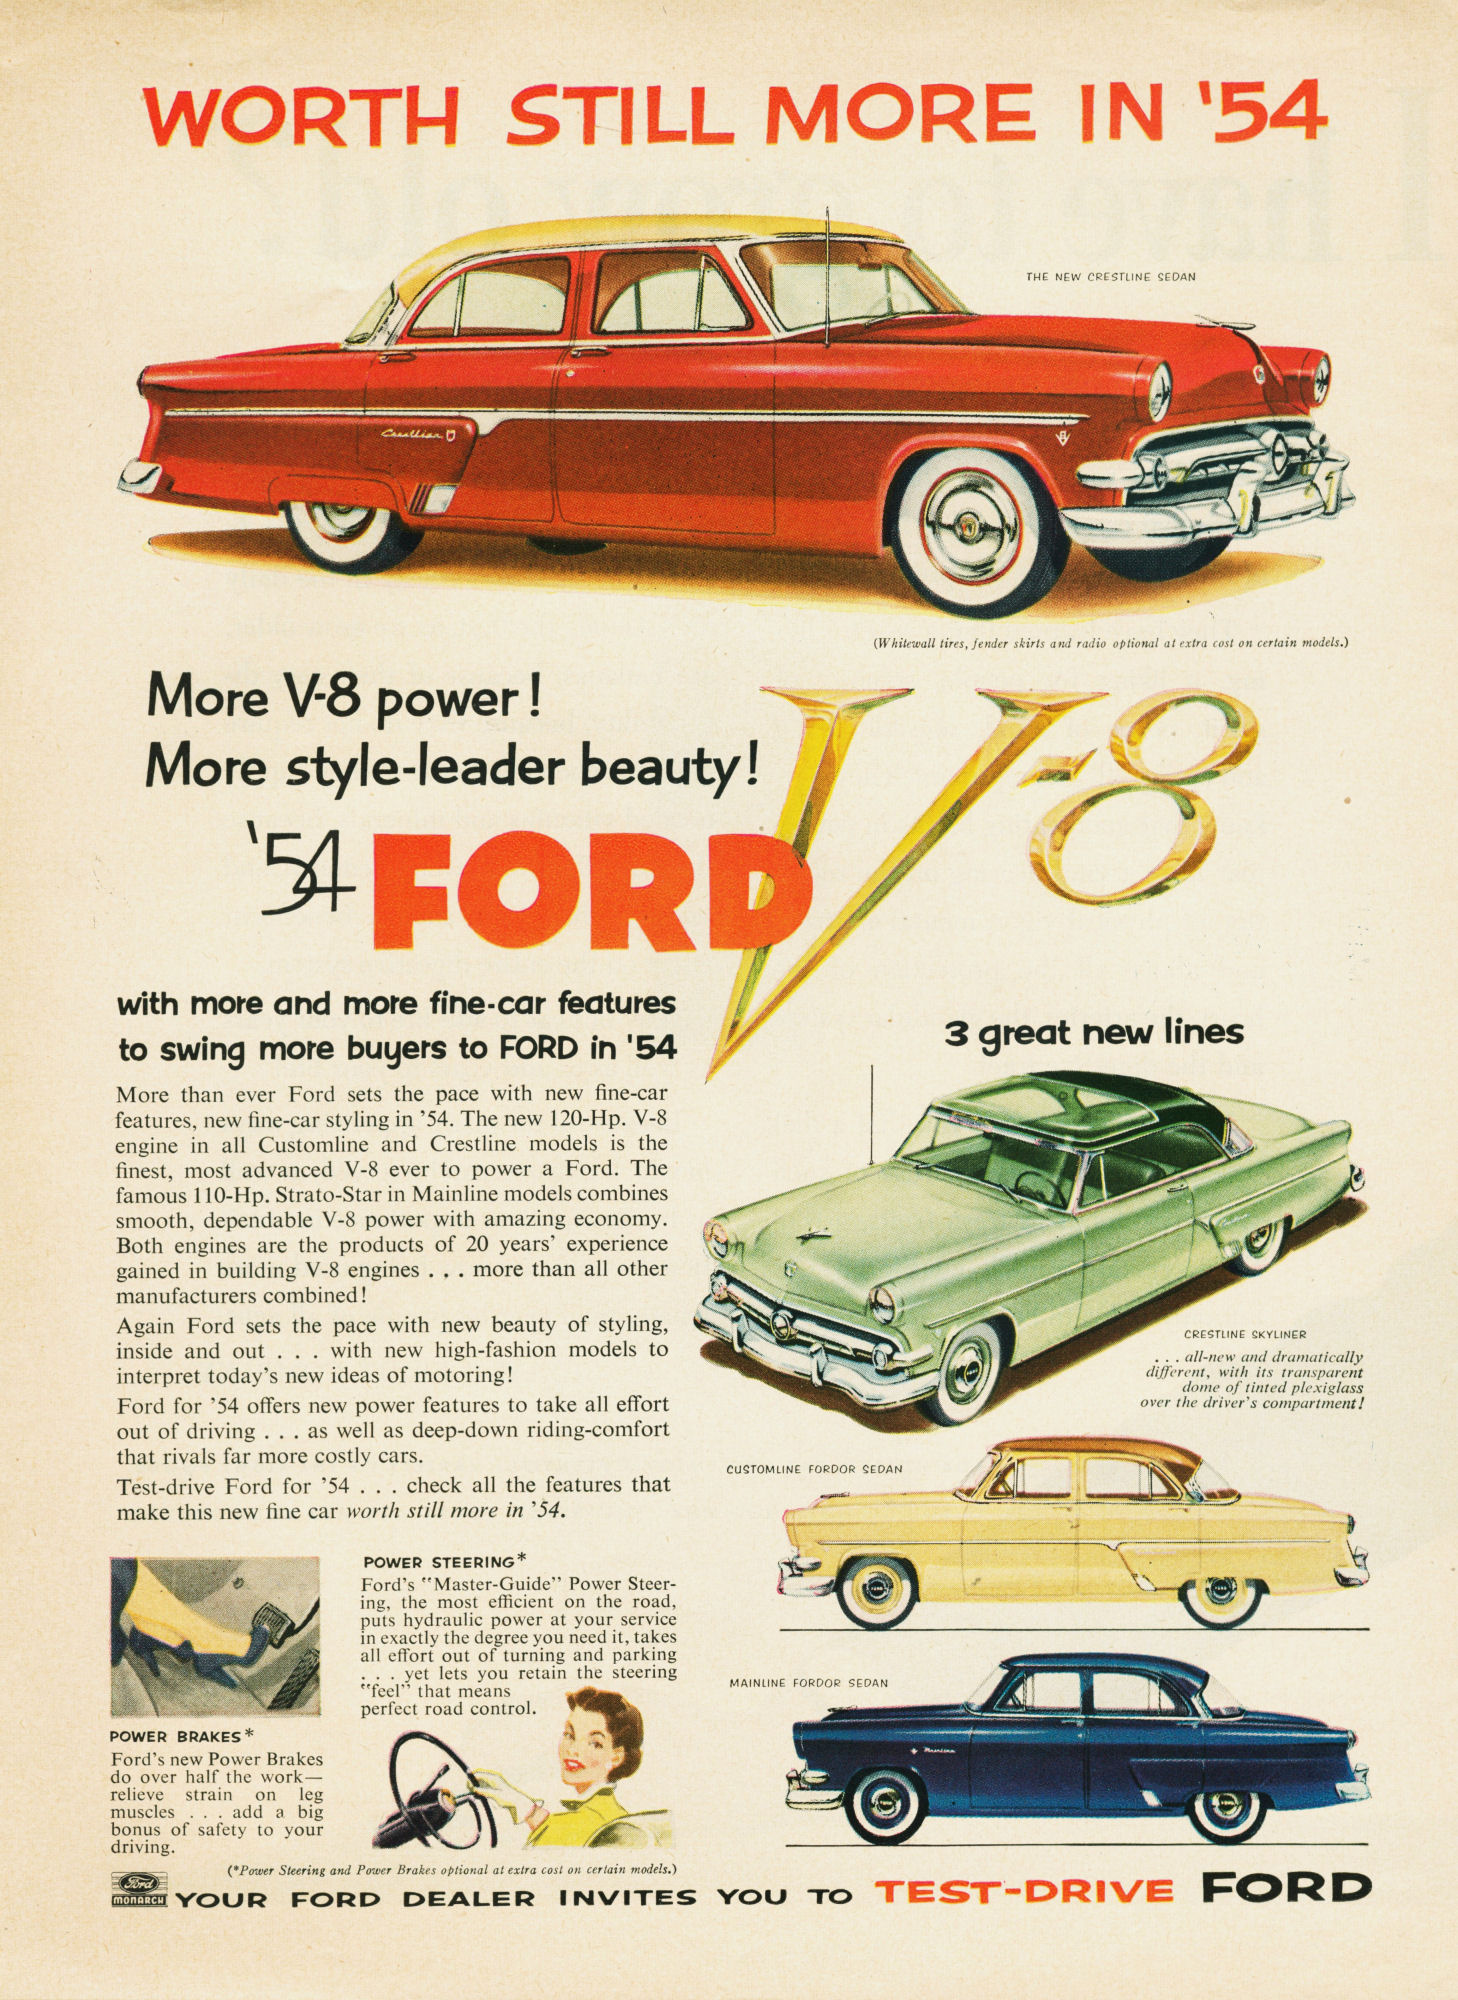 1954 Ford ads #2